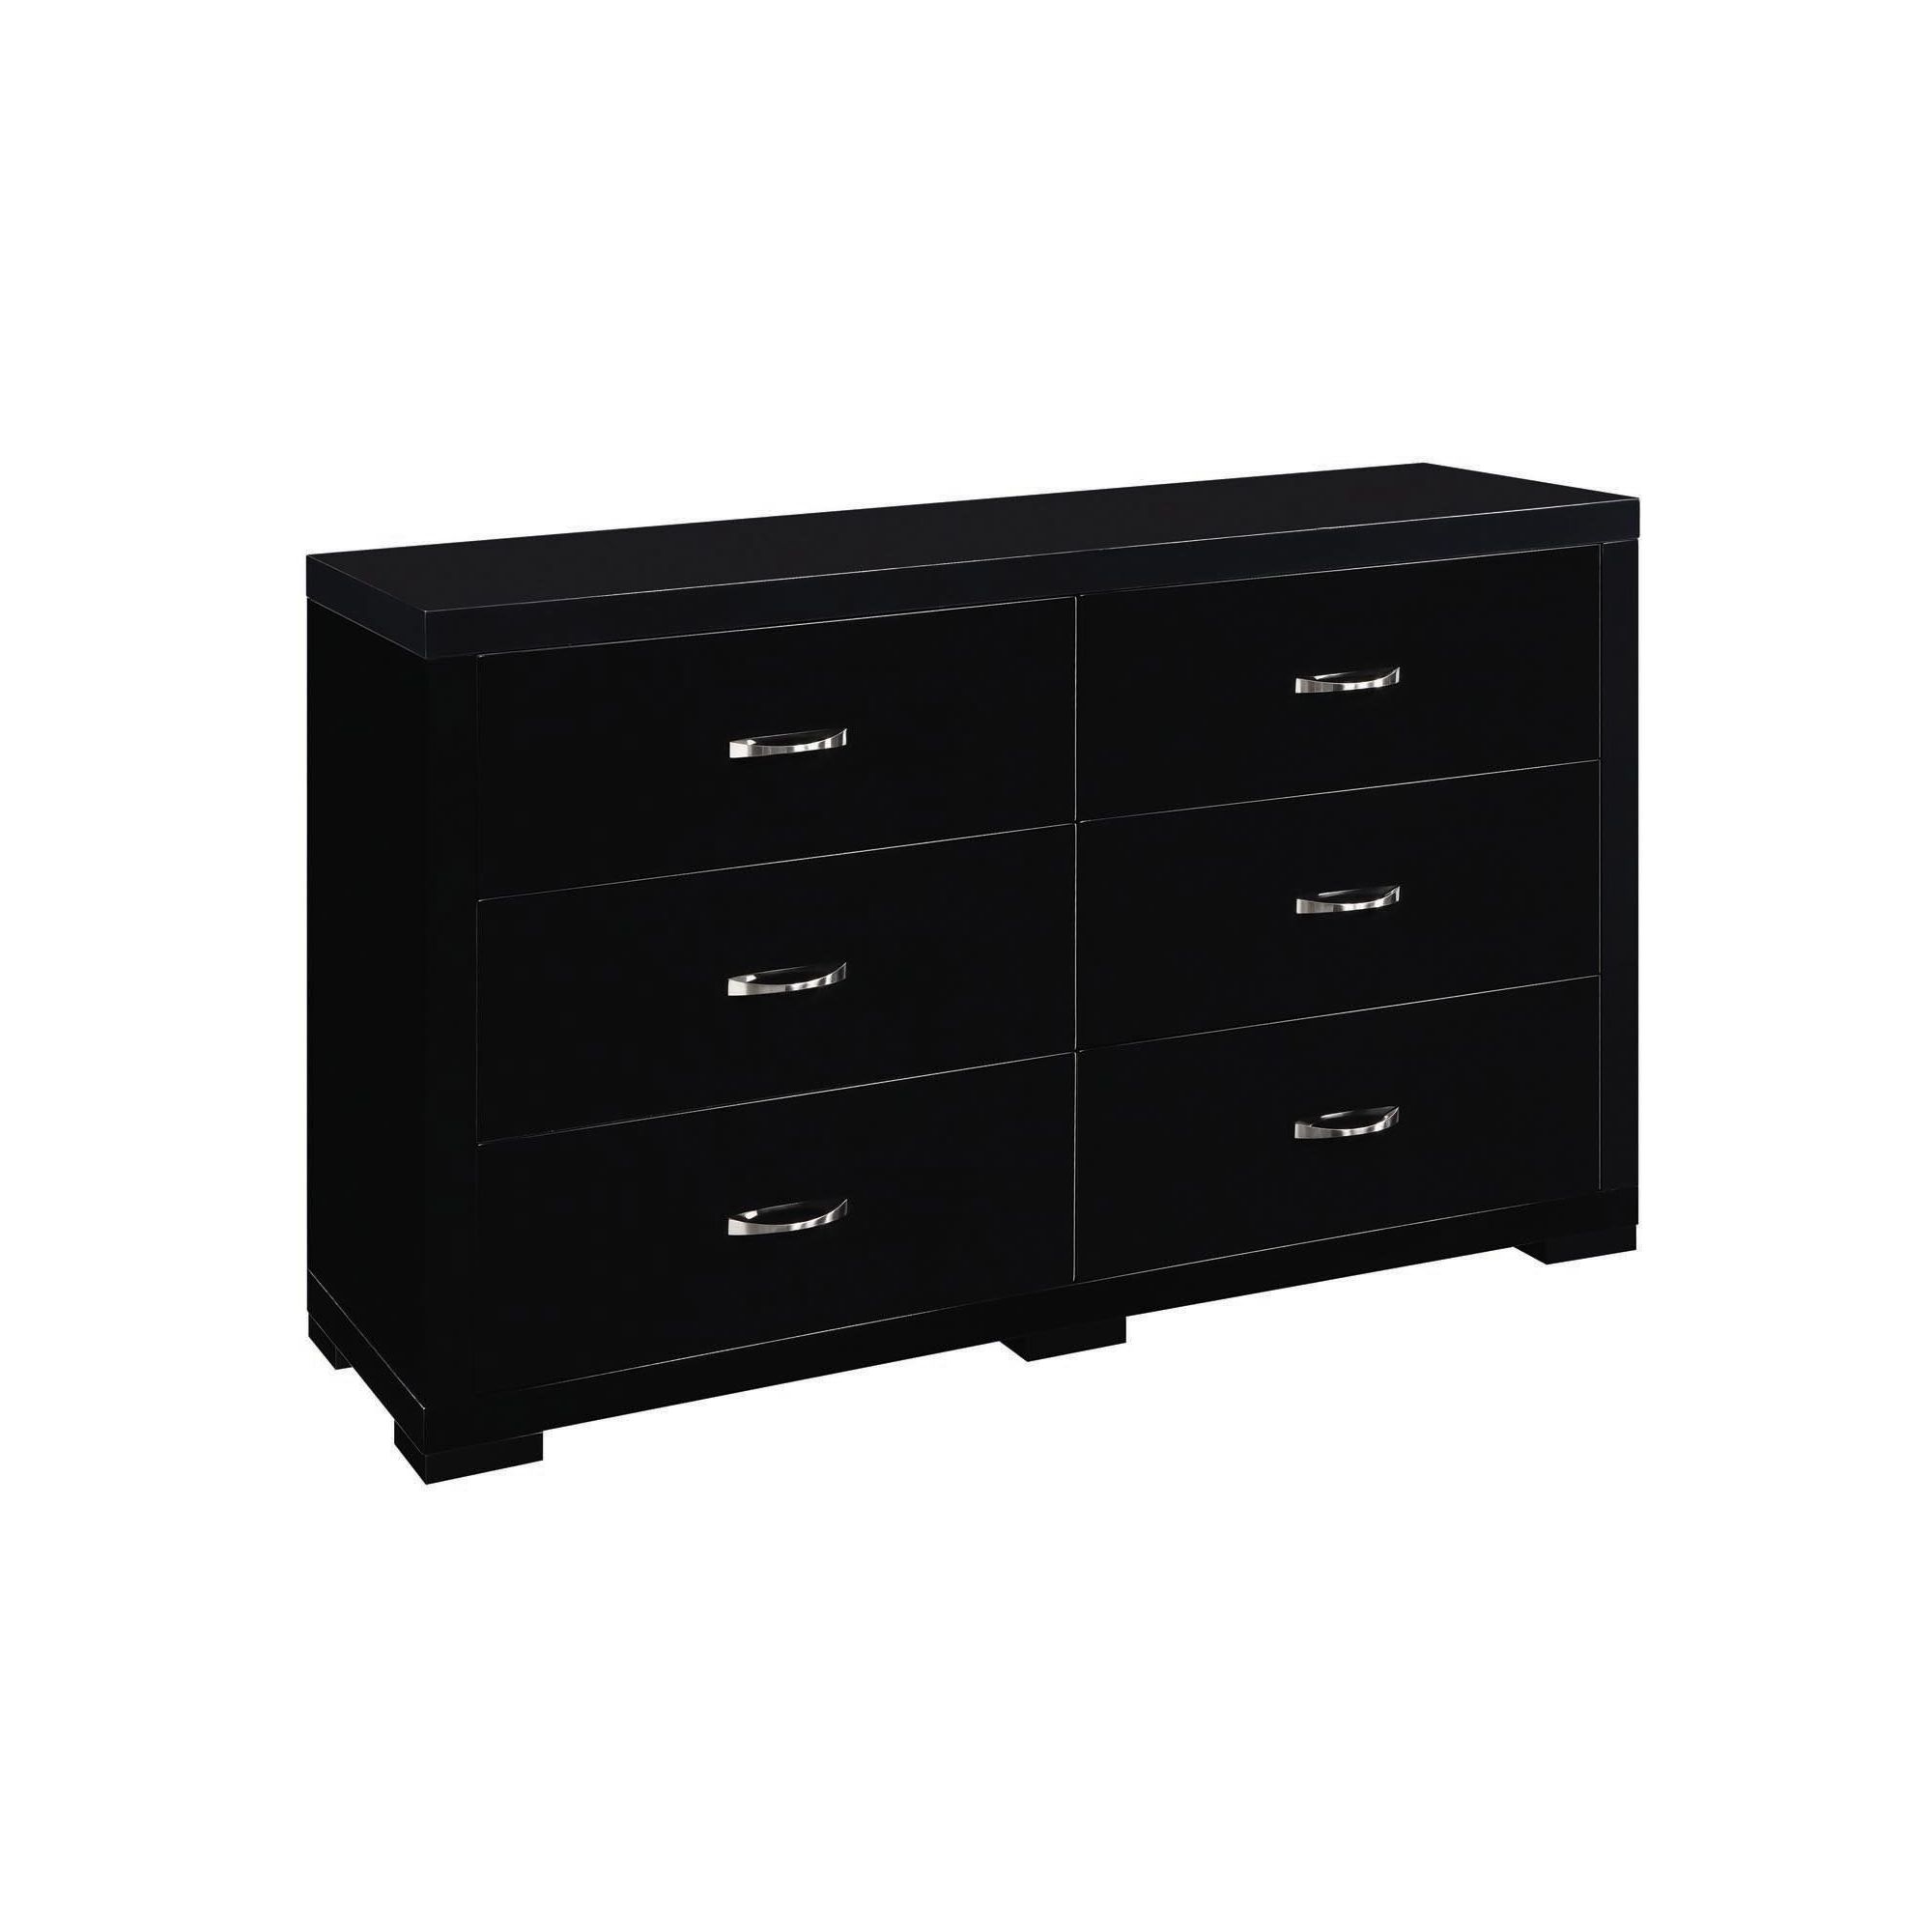 Home Zone Solar 6 Drawer Wide Chest - Black at Tesco Direct